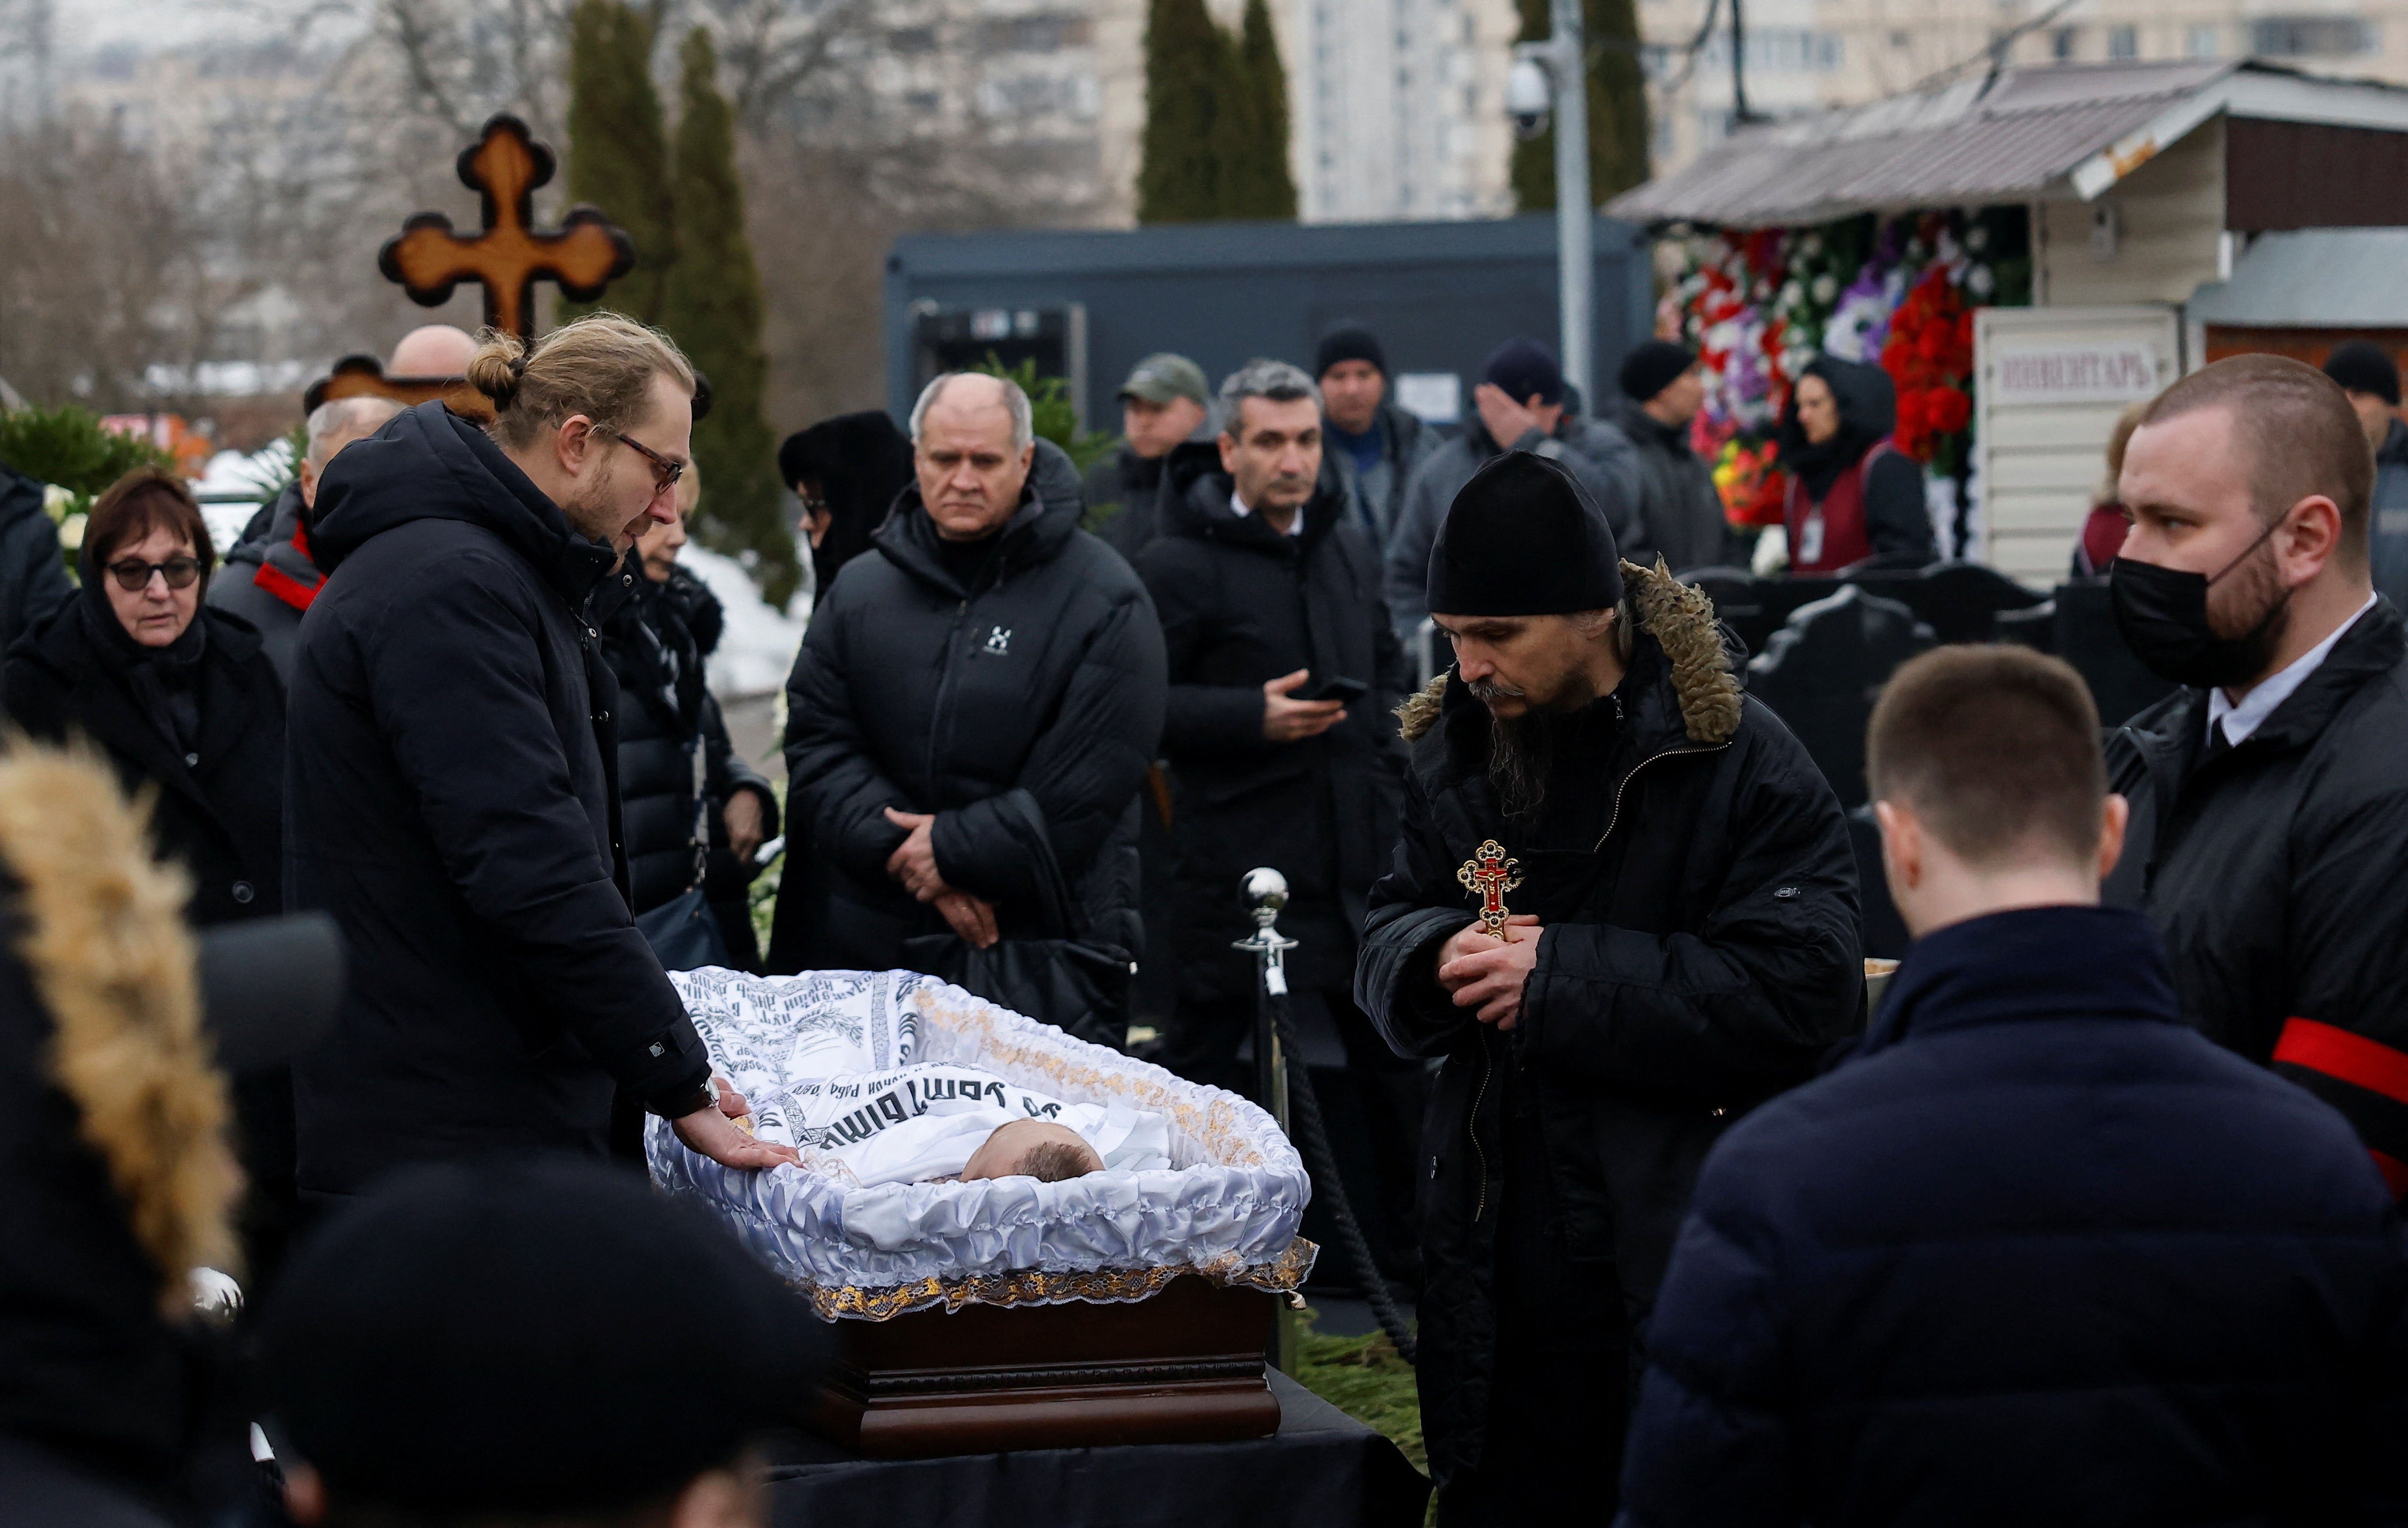 People attend the funeral of Russian opposition politician Alexei Navalny at the Borisovskoye cemetery in Moscow, on Friday